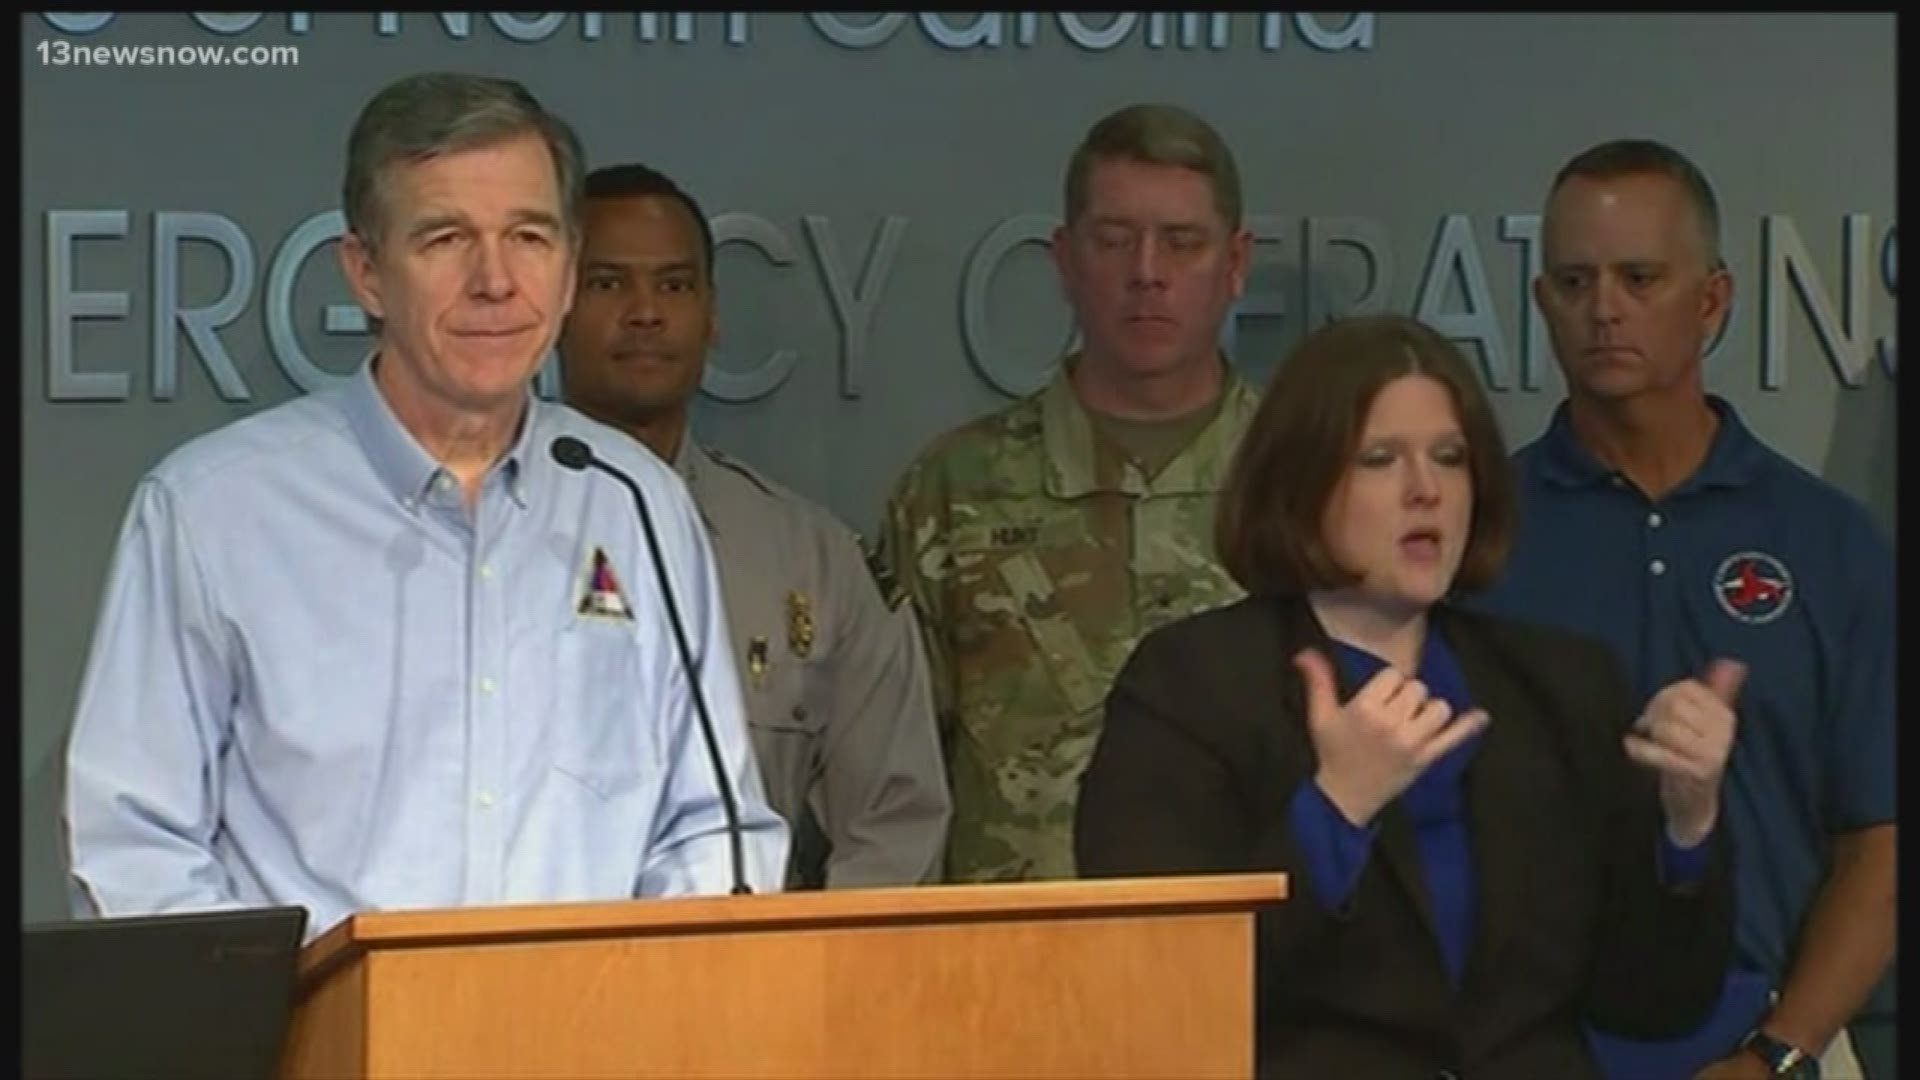 Governor Roy Cooper gave an update on how North Carolina is preparing for Hurricane Dorian. Crews said they are using lessons learned during Florence, to get ahead of any impact this storm has.